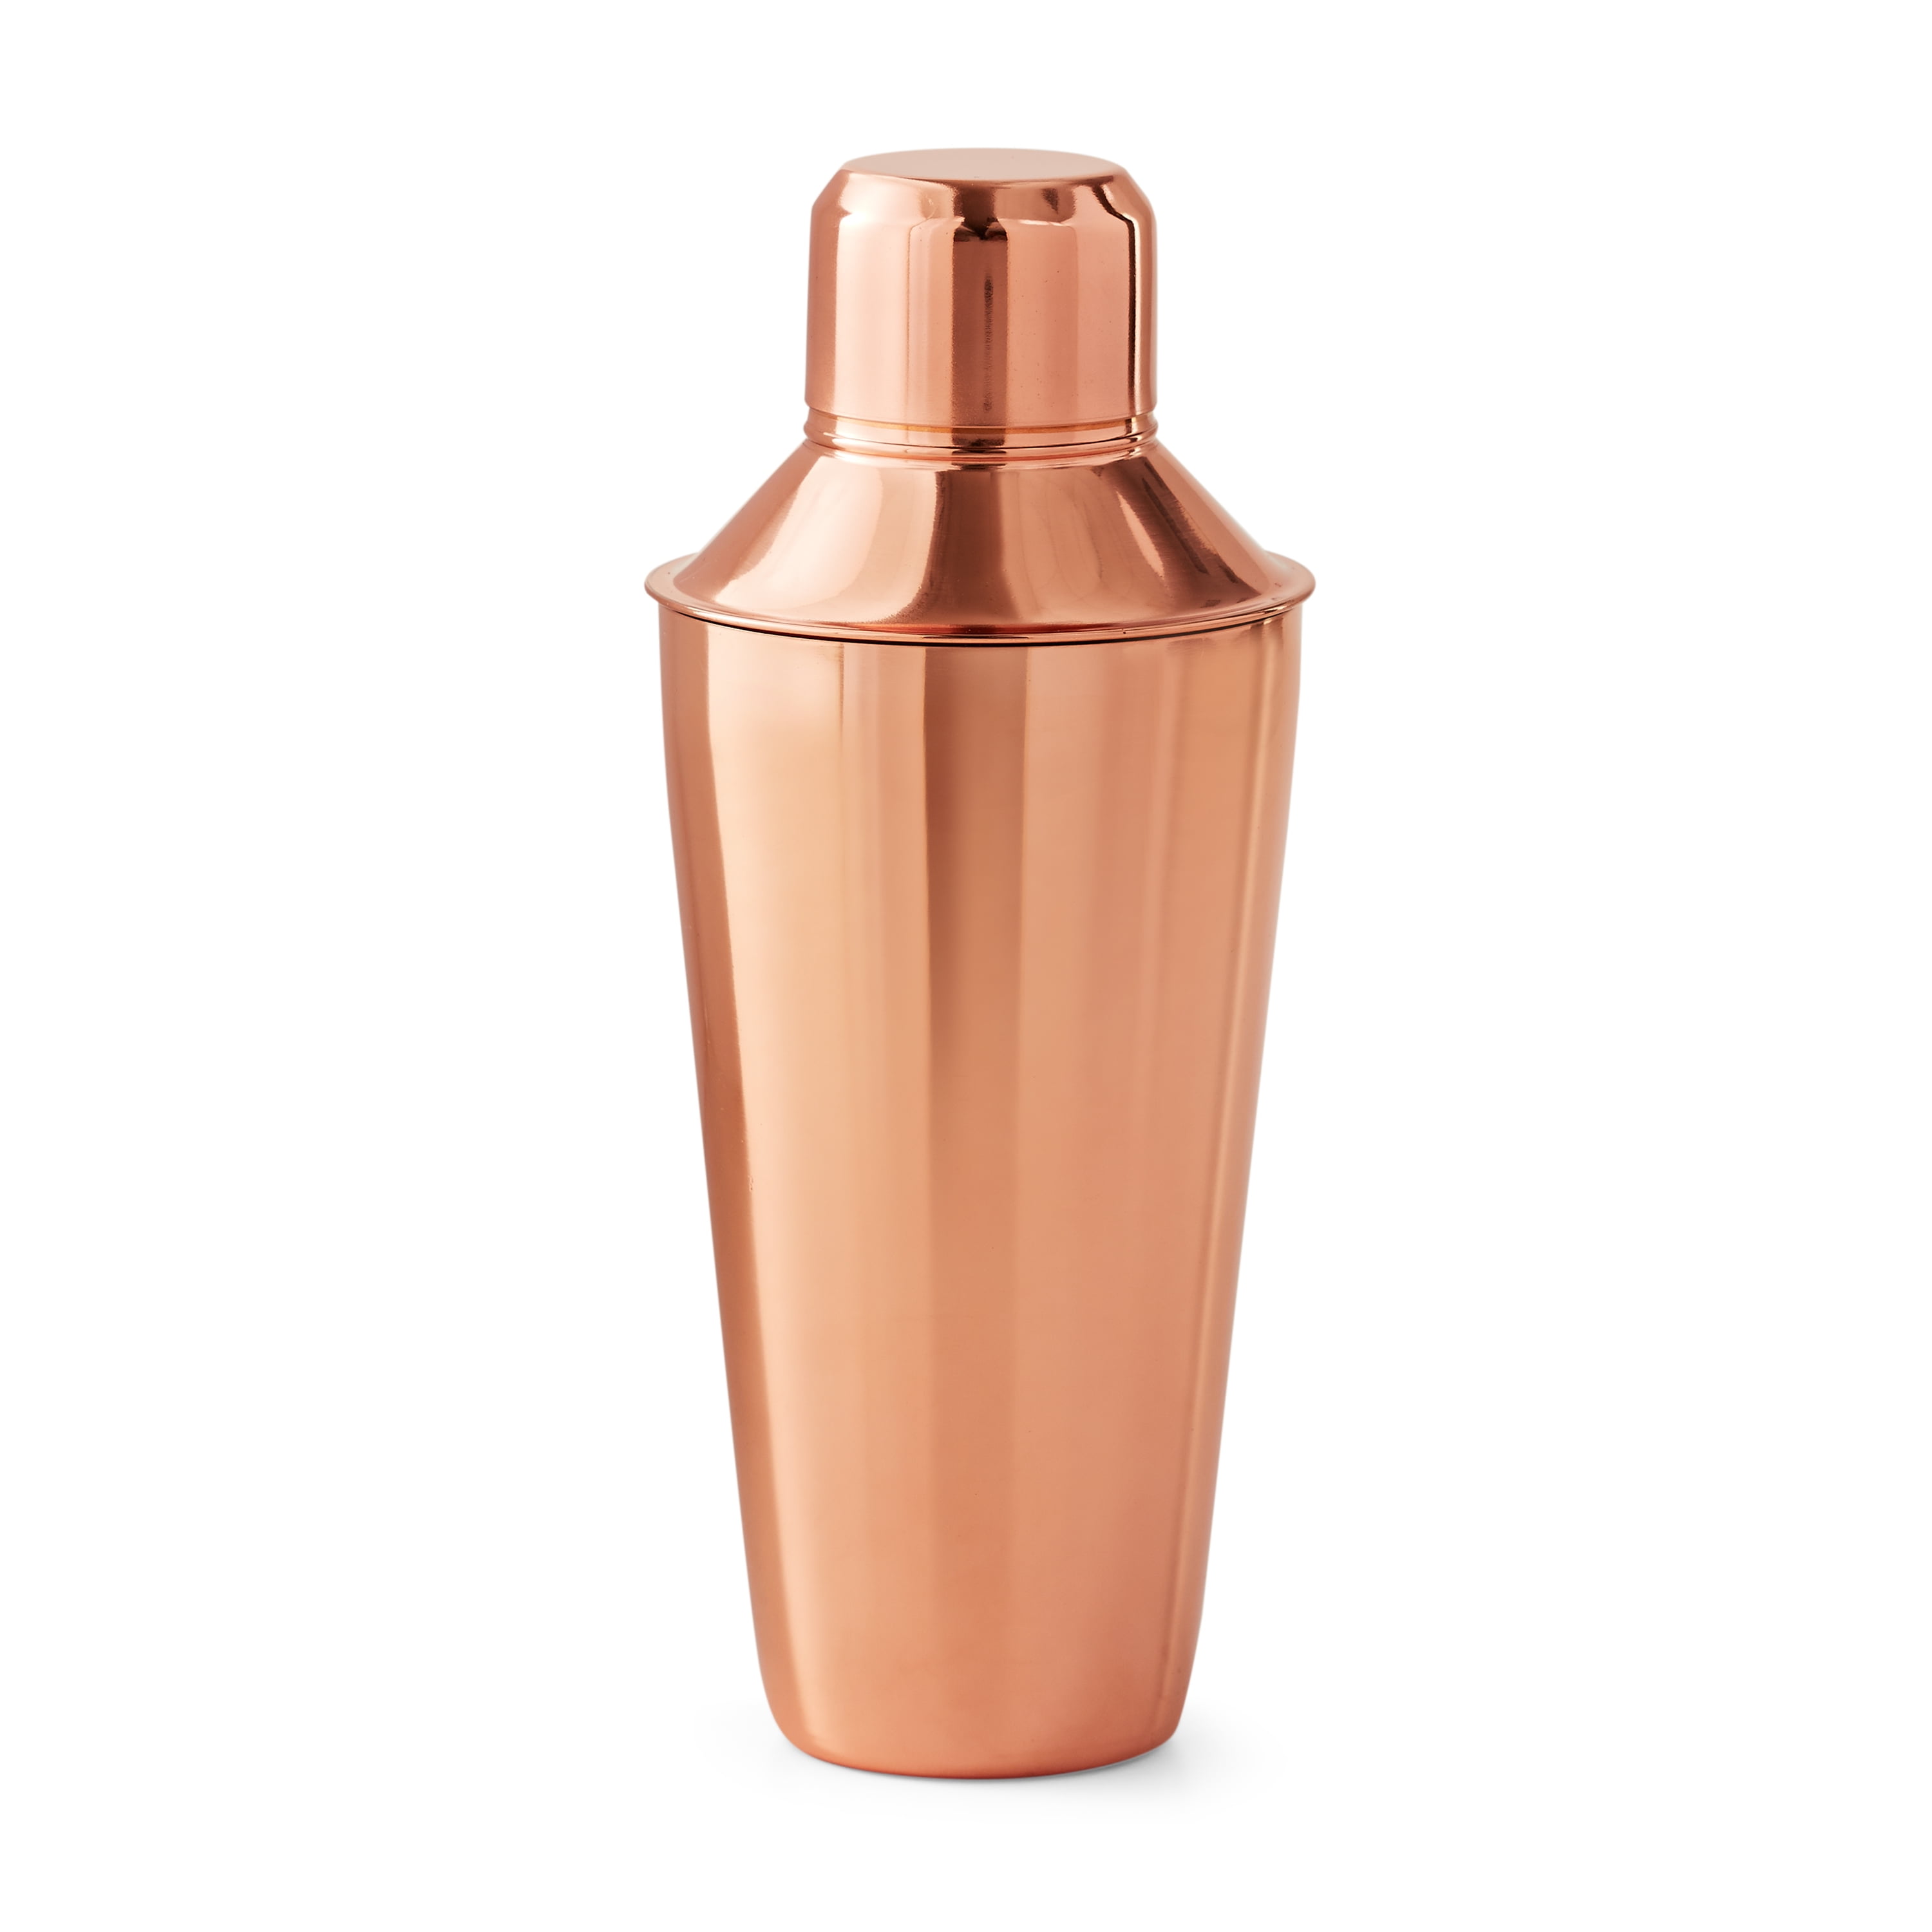 Personalise with Any Name Personalised Engraved Rose Gold Cocktail Shaker Set with Cocktail Design